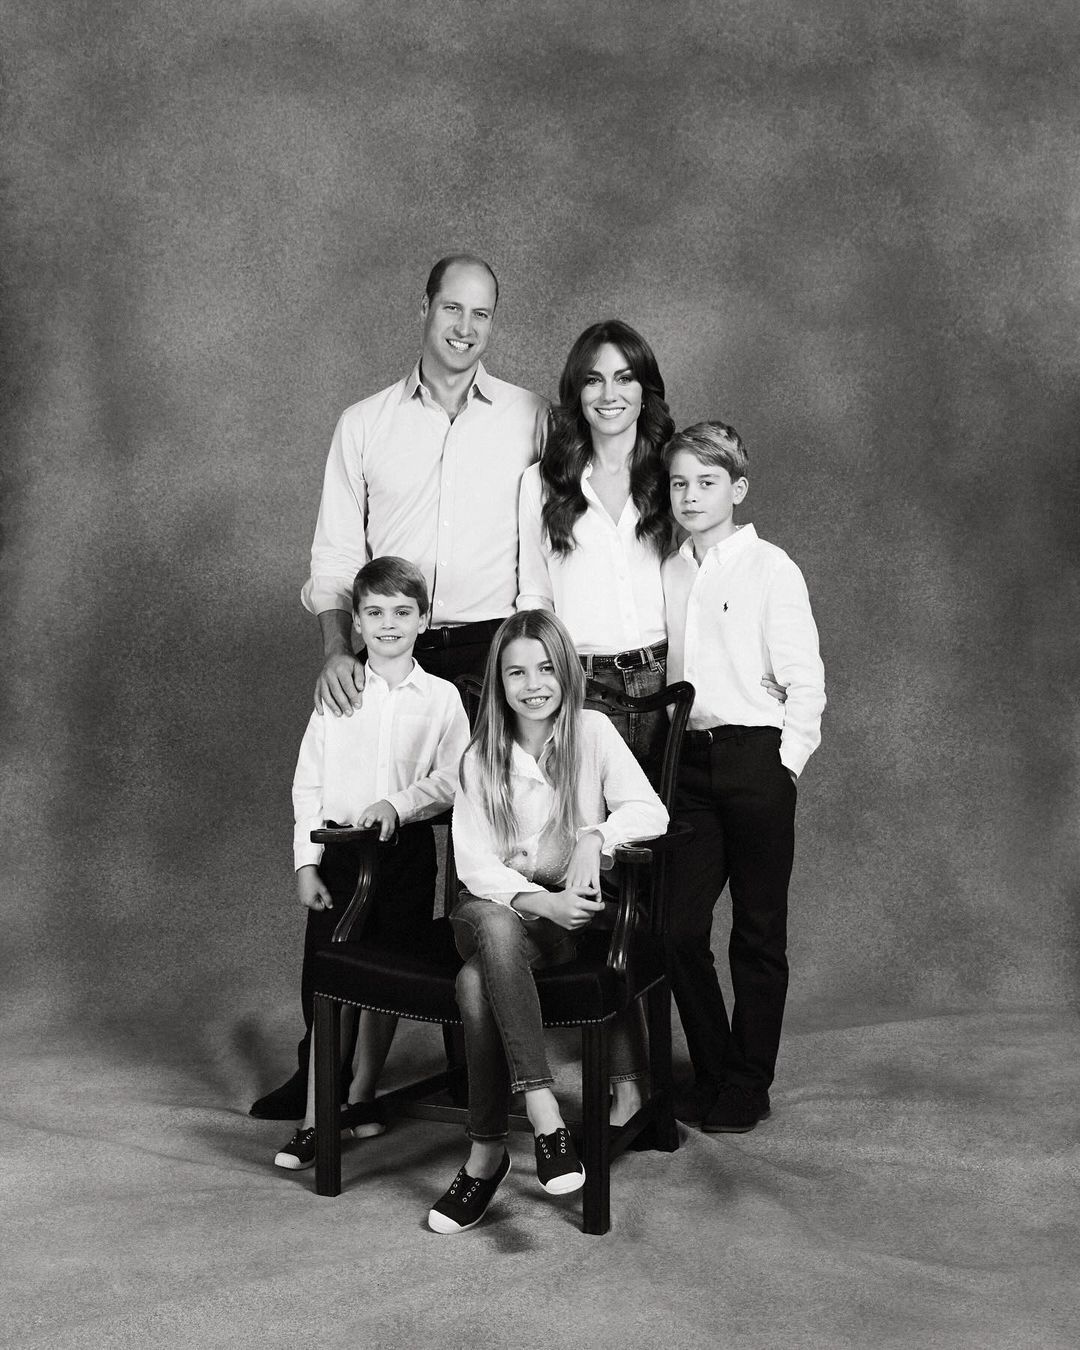 In jeans and white shirts: Kate Middleton and Prince William with children surprised with an atypical Christmas card. Photo.